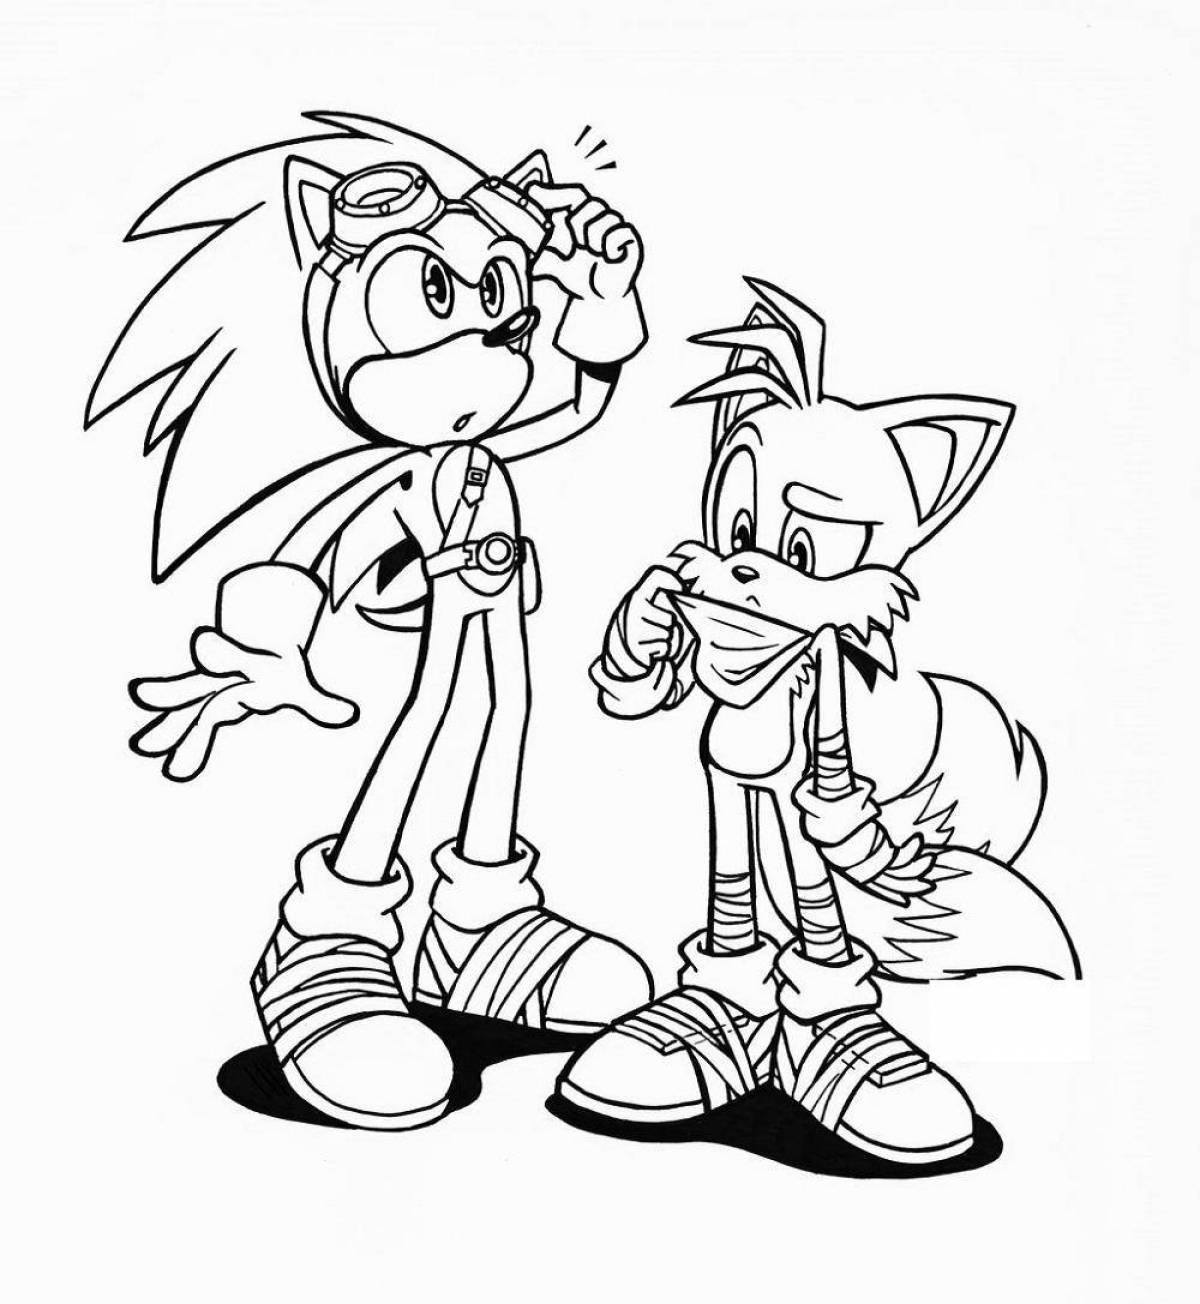 Colorful sonic boom coloring book